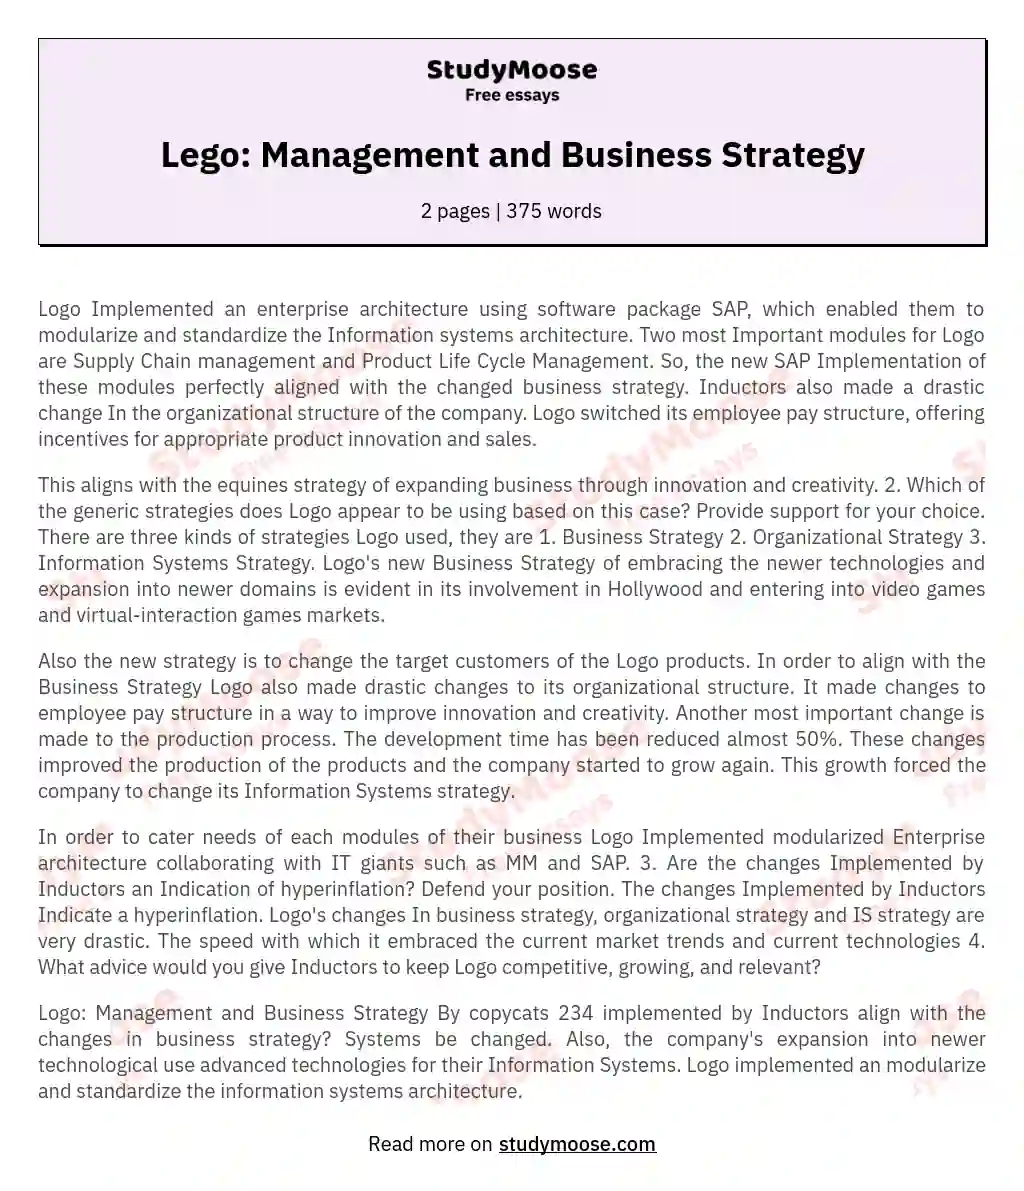 Lego: Management and Business Strategy essay